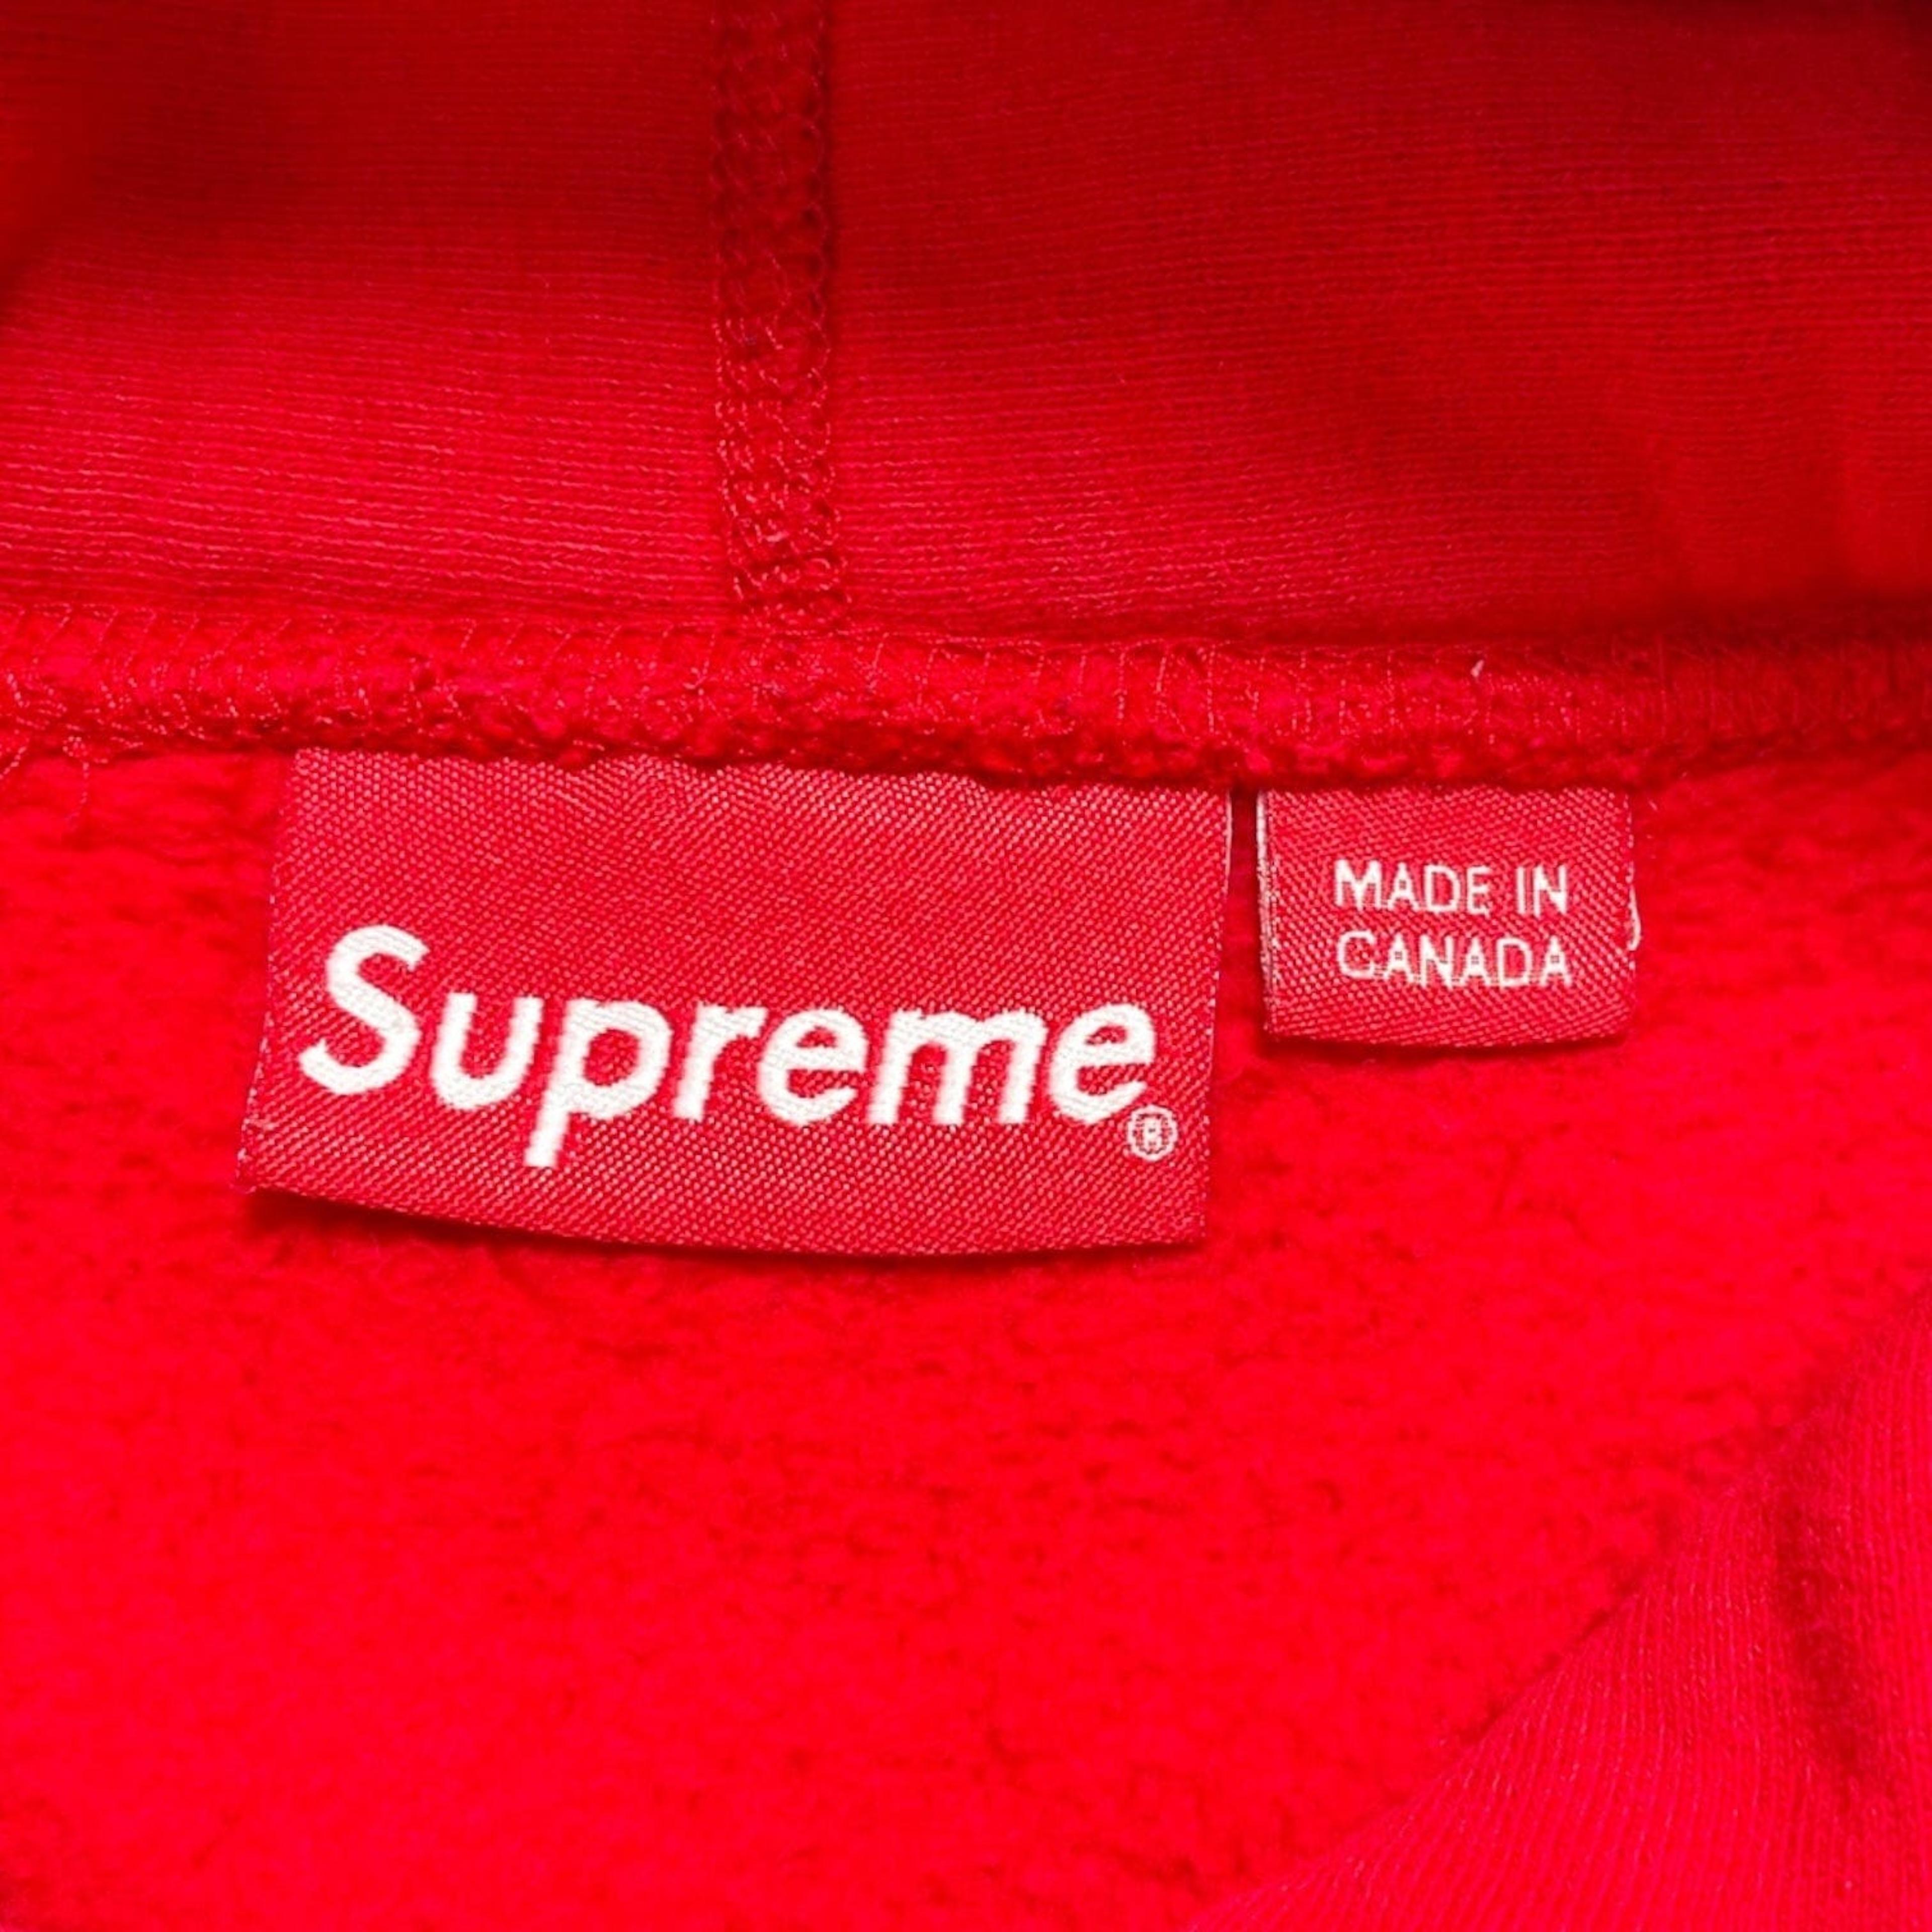 Alternate View 2 of Supreme Box Logo Hooded Sweatshirt (FW17) Red Pre-Owned